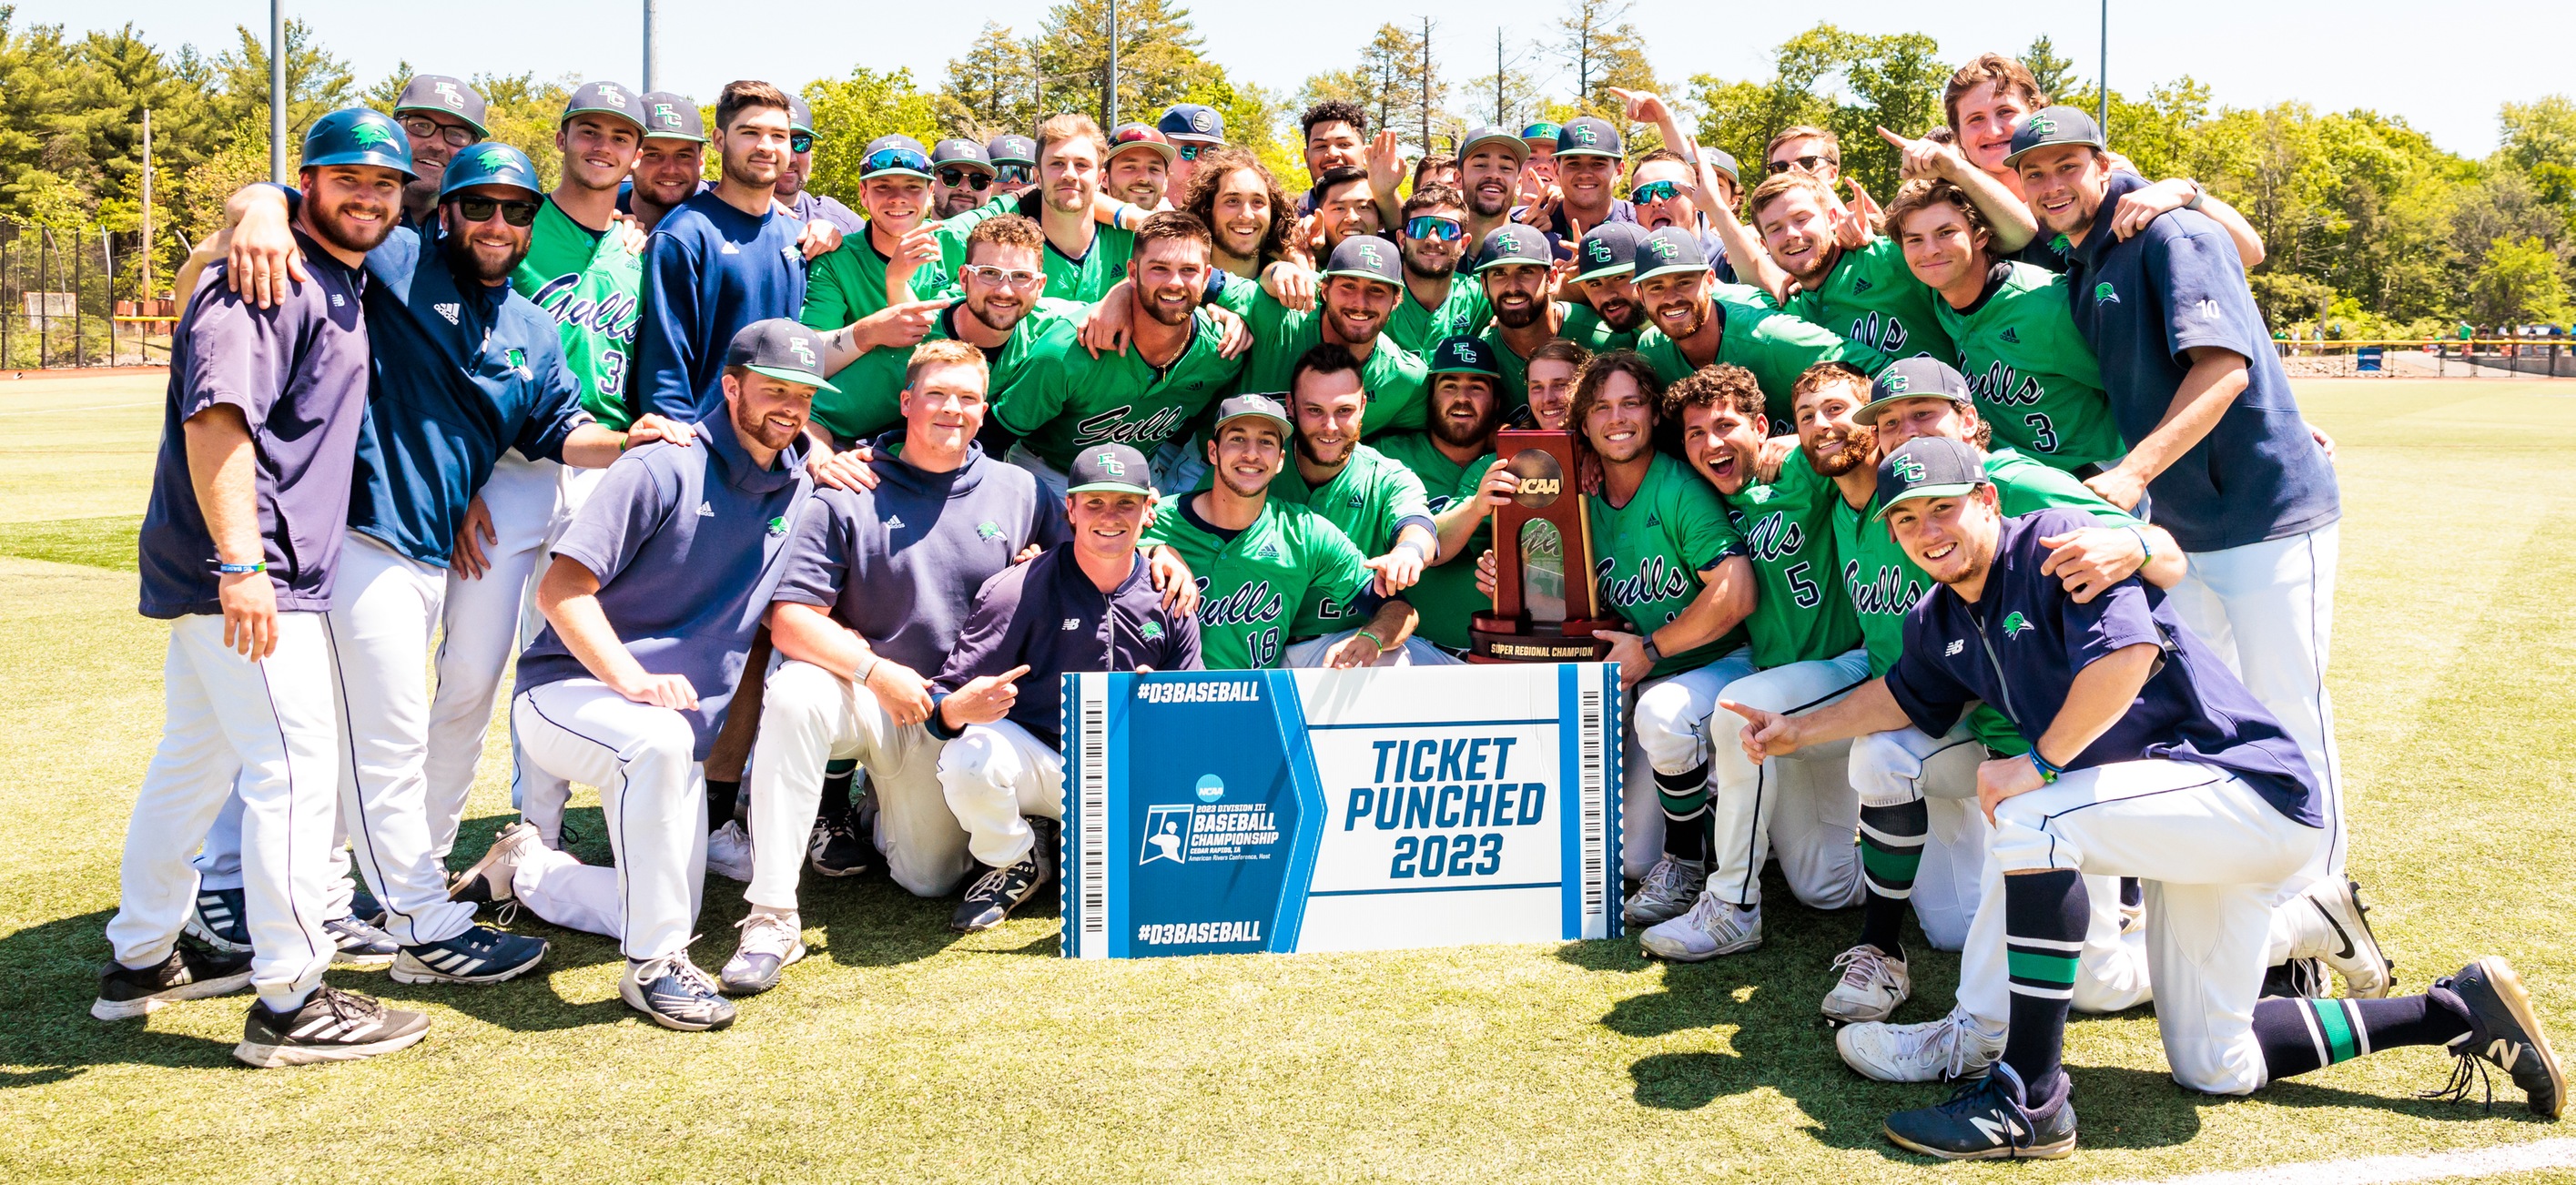 HISTORY MADE! No. 4/8 Endicott Punches Ticket To First-Ever College World Series, 7-3